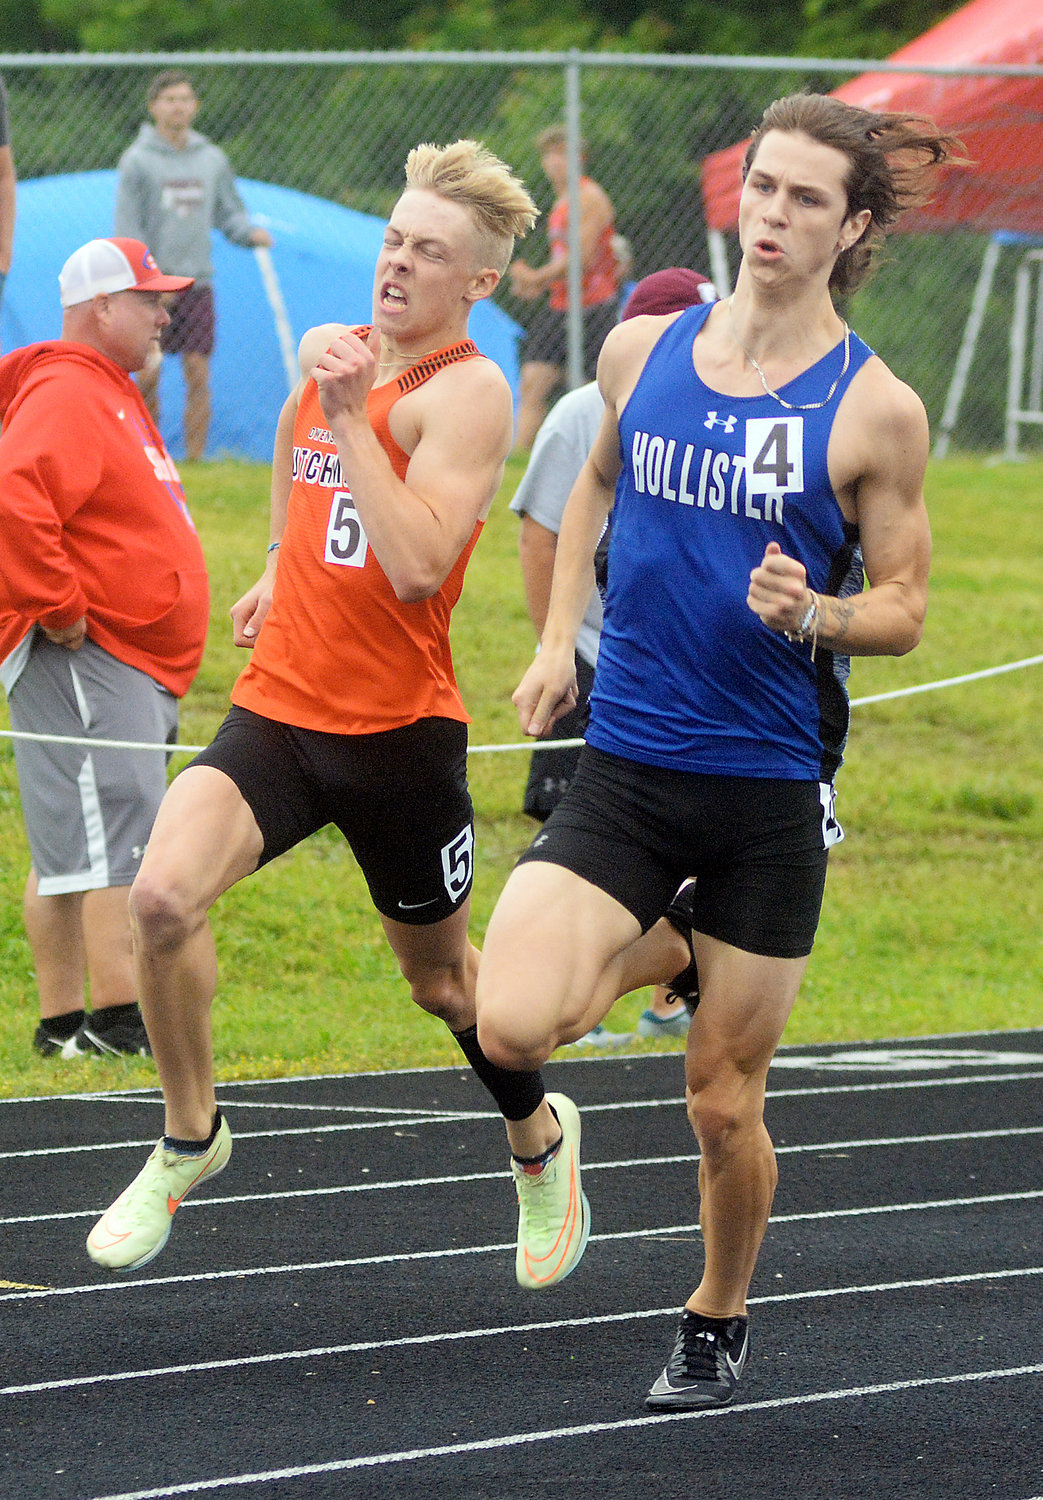 Jacob Breedlove (far left) turns the corner in the boys 200m dash with Hollister’s Tristen Parker racing right by his side. Breedlove won the race in 49.96 to advance to state.